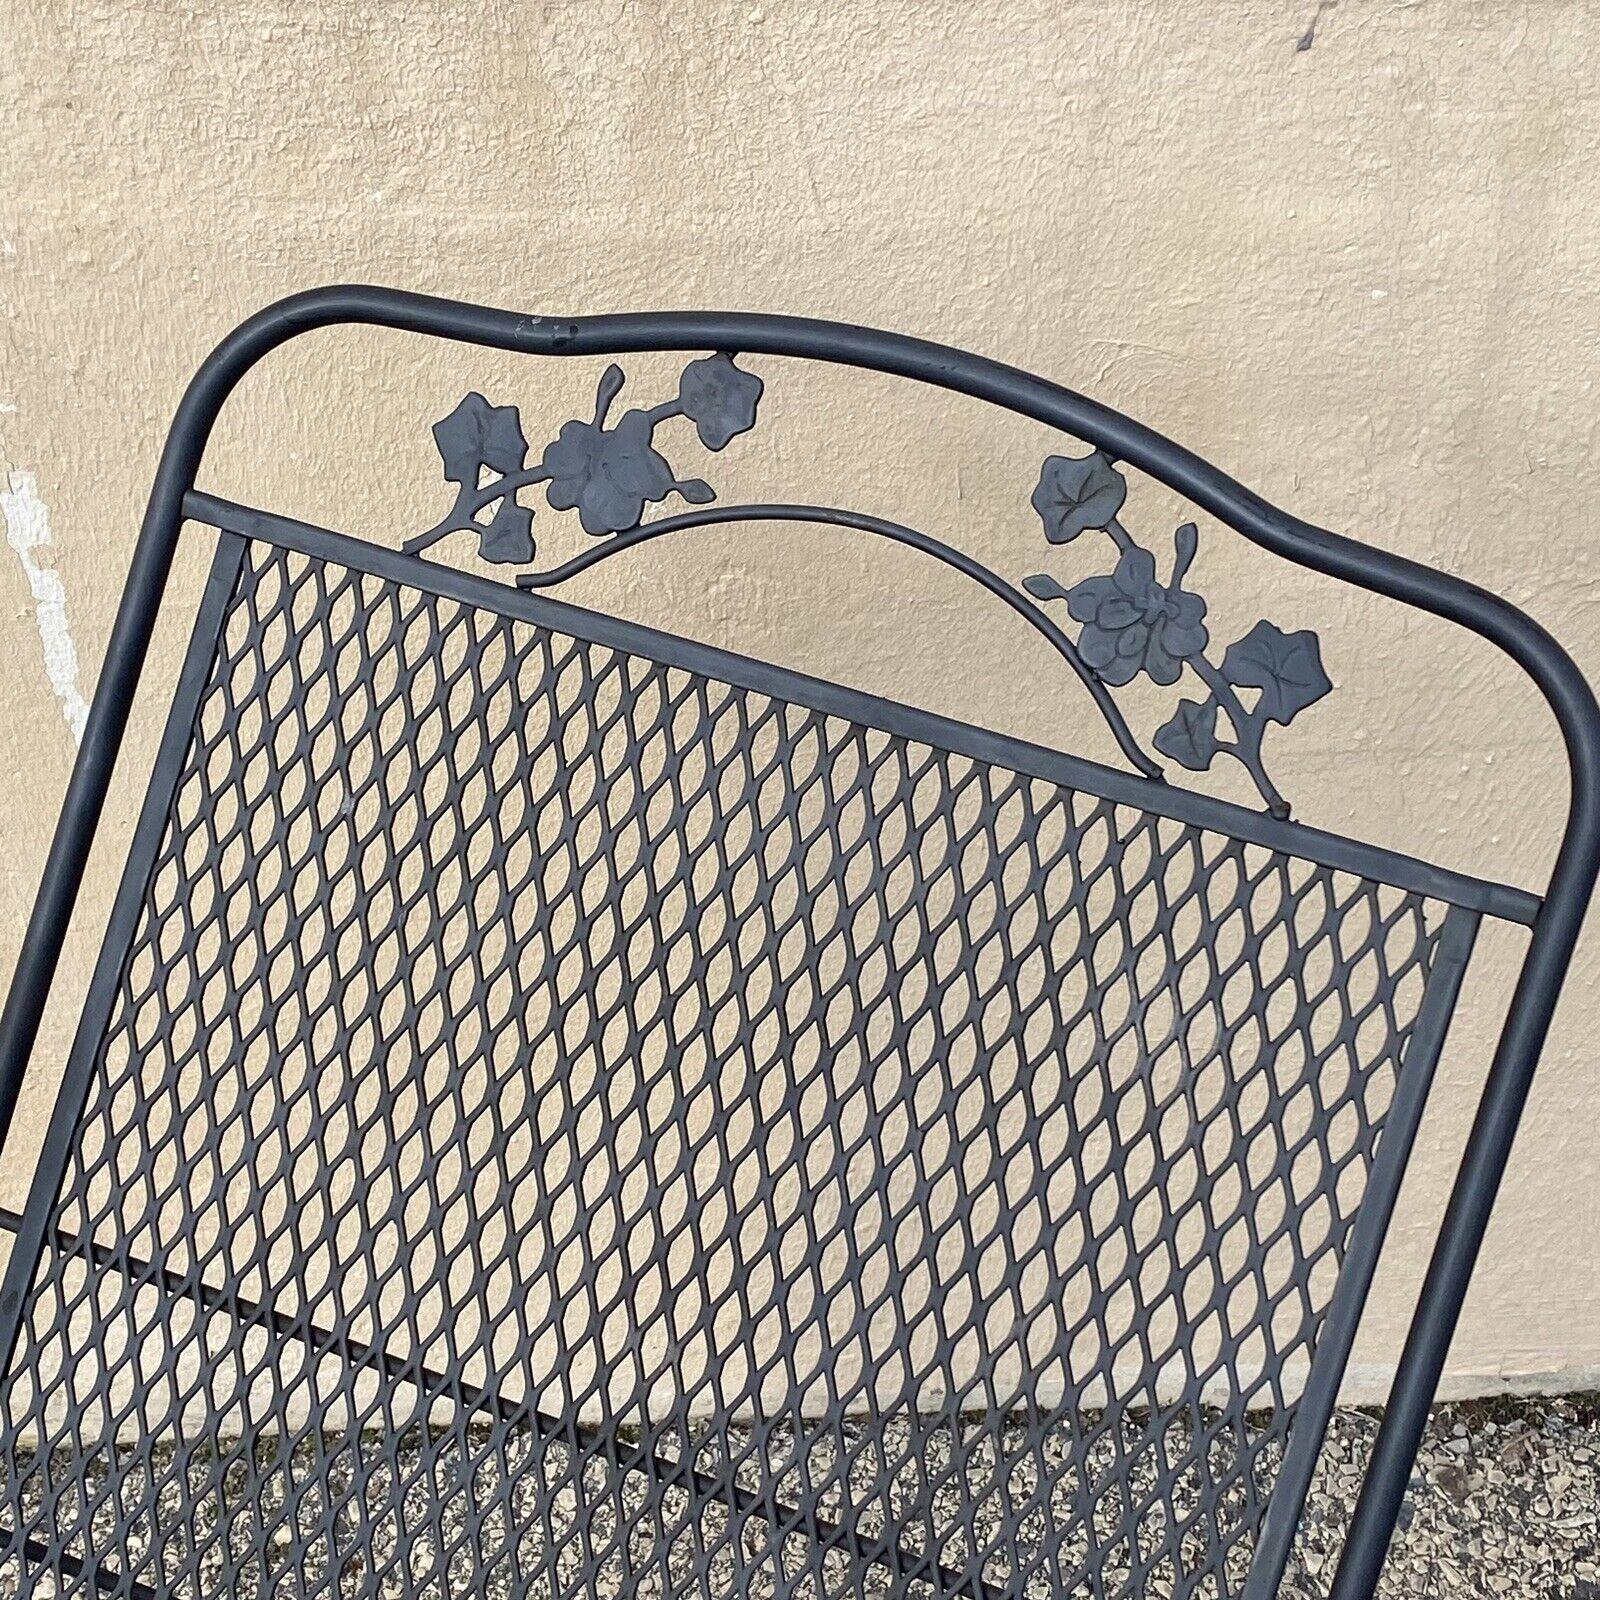 Vintage Wrought Iron Flower Pattern Adjustable Garden Patio Chaise Lounge Chair In Good Condition For Sale In Philadelphia, PA